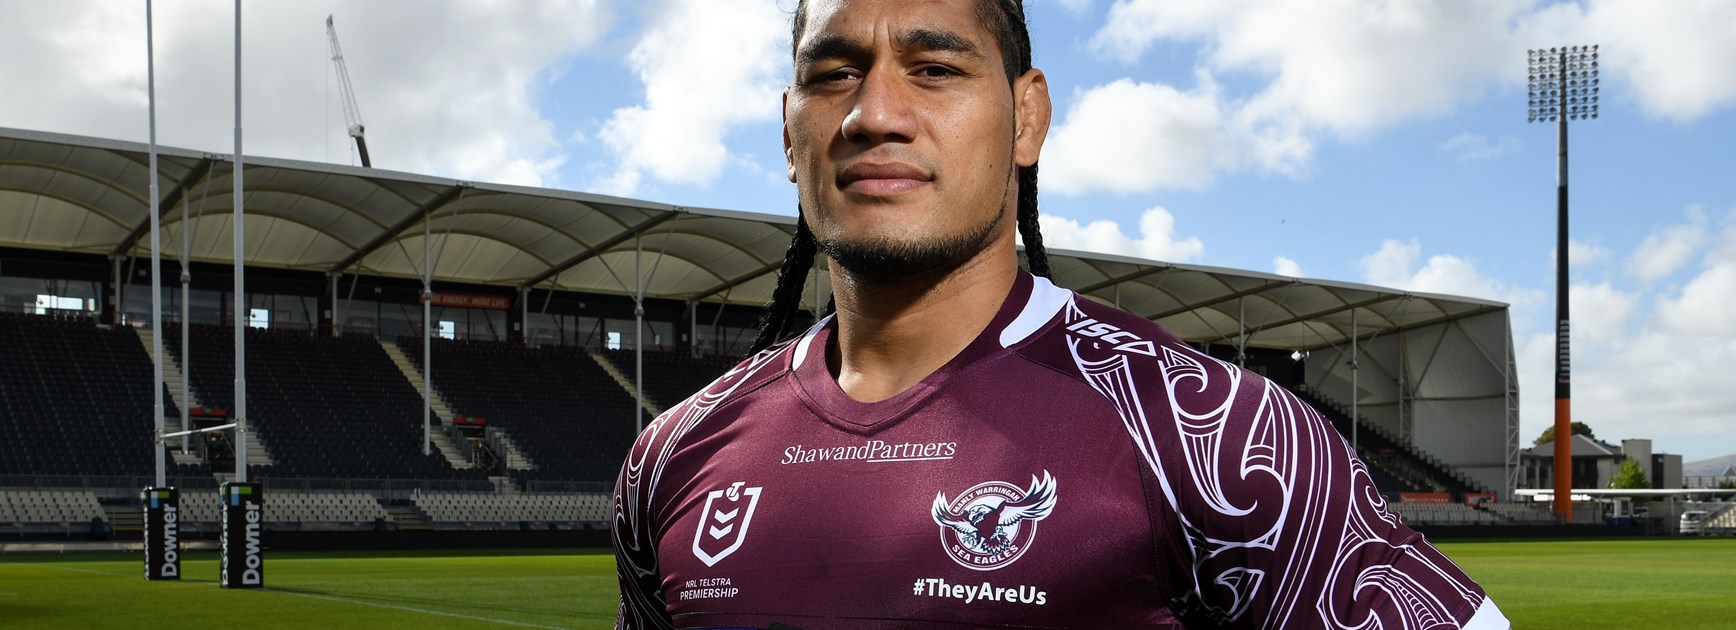 Sea Eagles proud to carry #TheyAreUs on jerseys